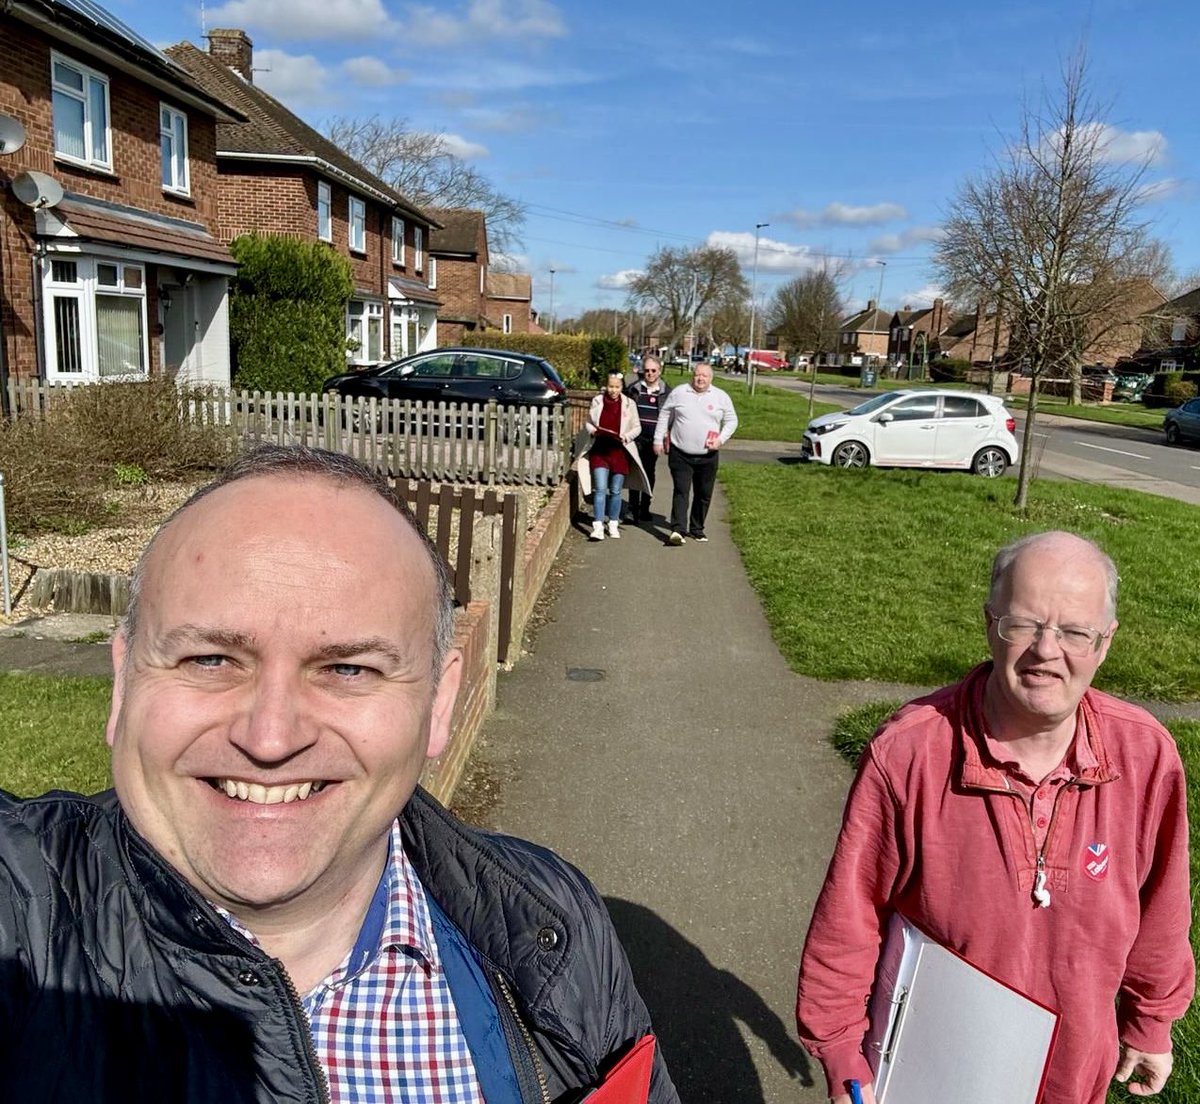 Some great conversations across Peterborough on the campaign trail this weekend. People are fed up with the chaos in government as much as the Tories policies. It’s time for a fresh start. Thanks to everyone who stopped to chat.